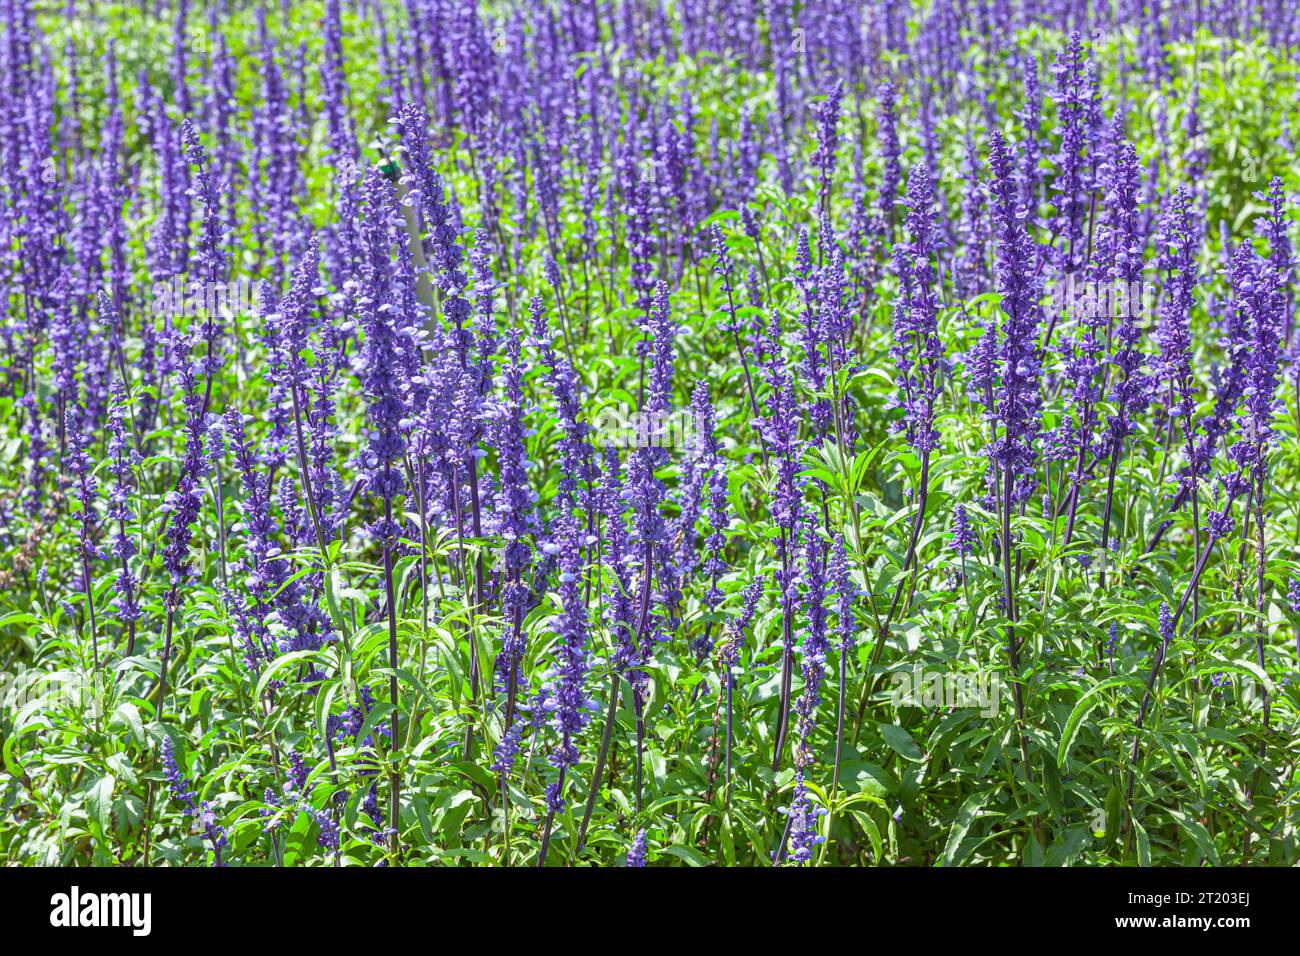 The field of Salvia Farinacea also known as Mealycup blue sage, blooming in sunny day Stock Photo